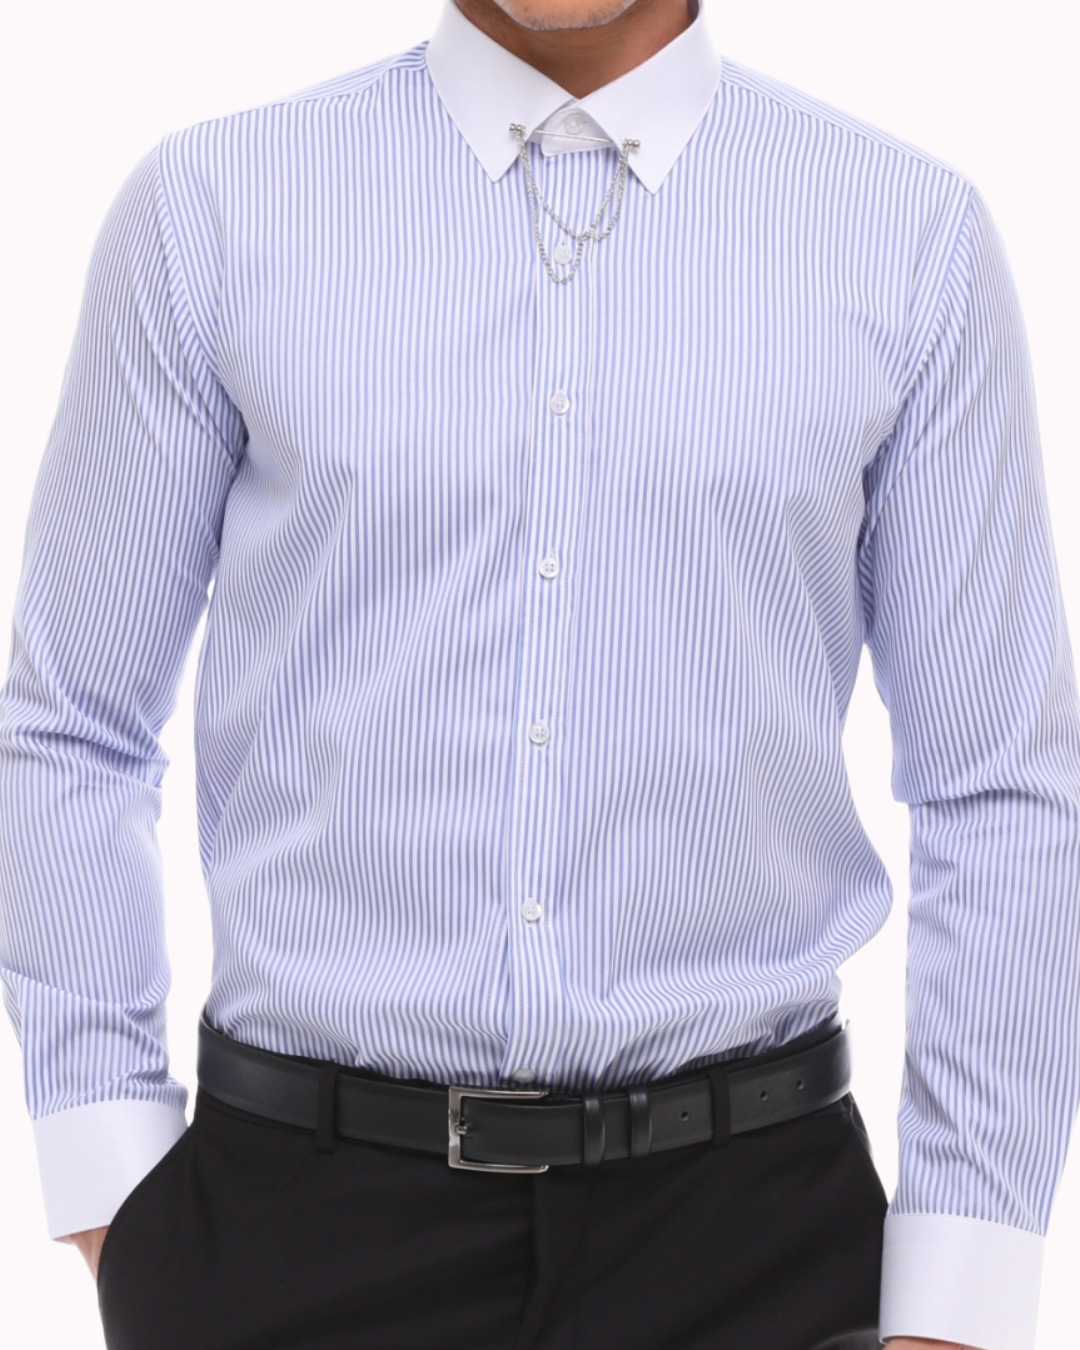 ICONIC PINNED LILAC STRIPE - Lilac Stripe with White Pinned Collar Shirt